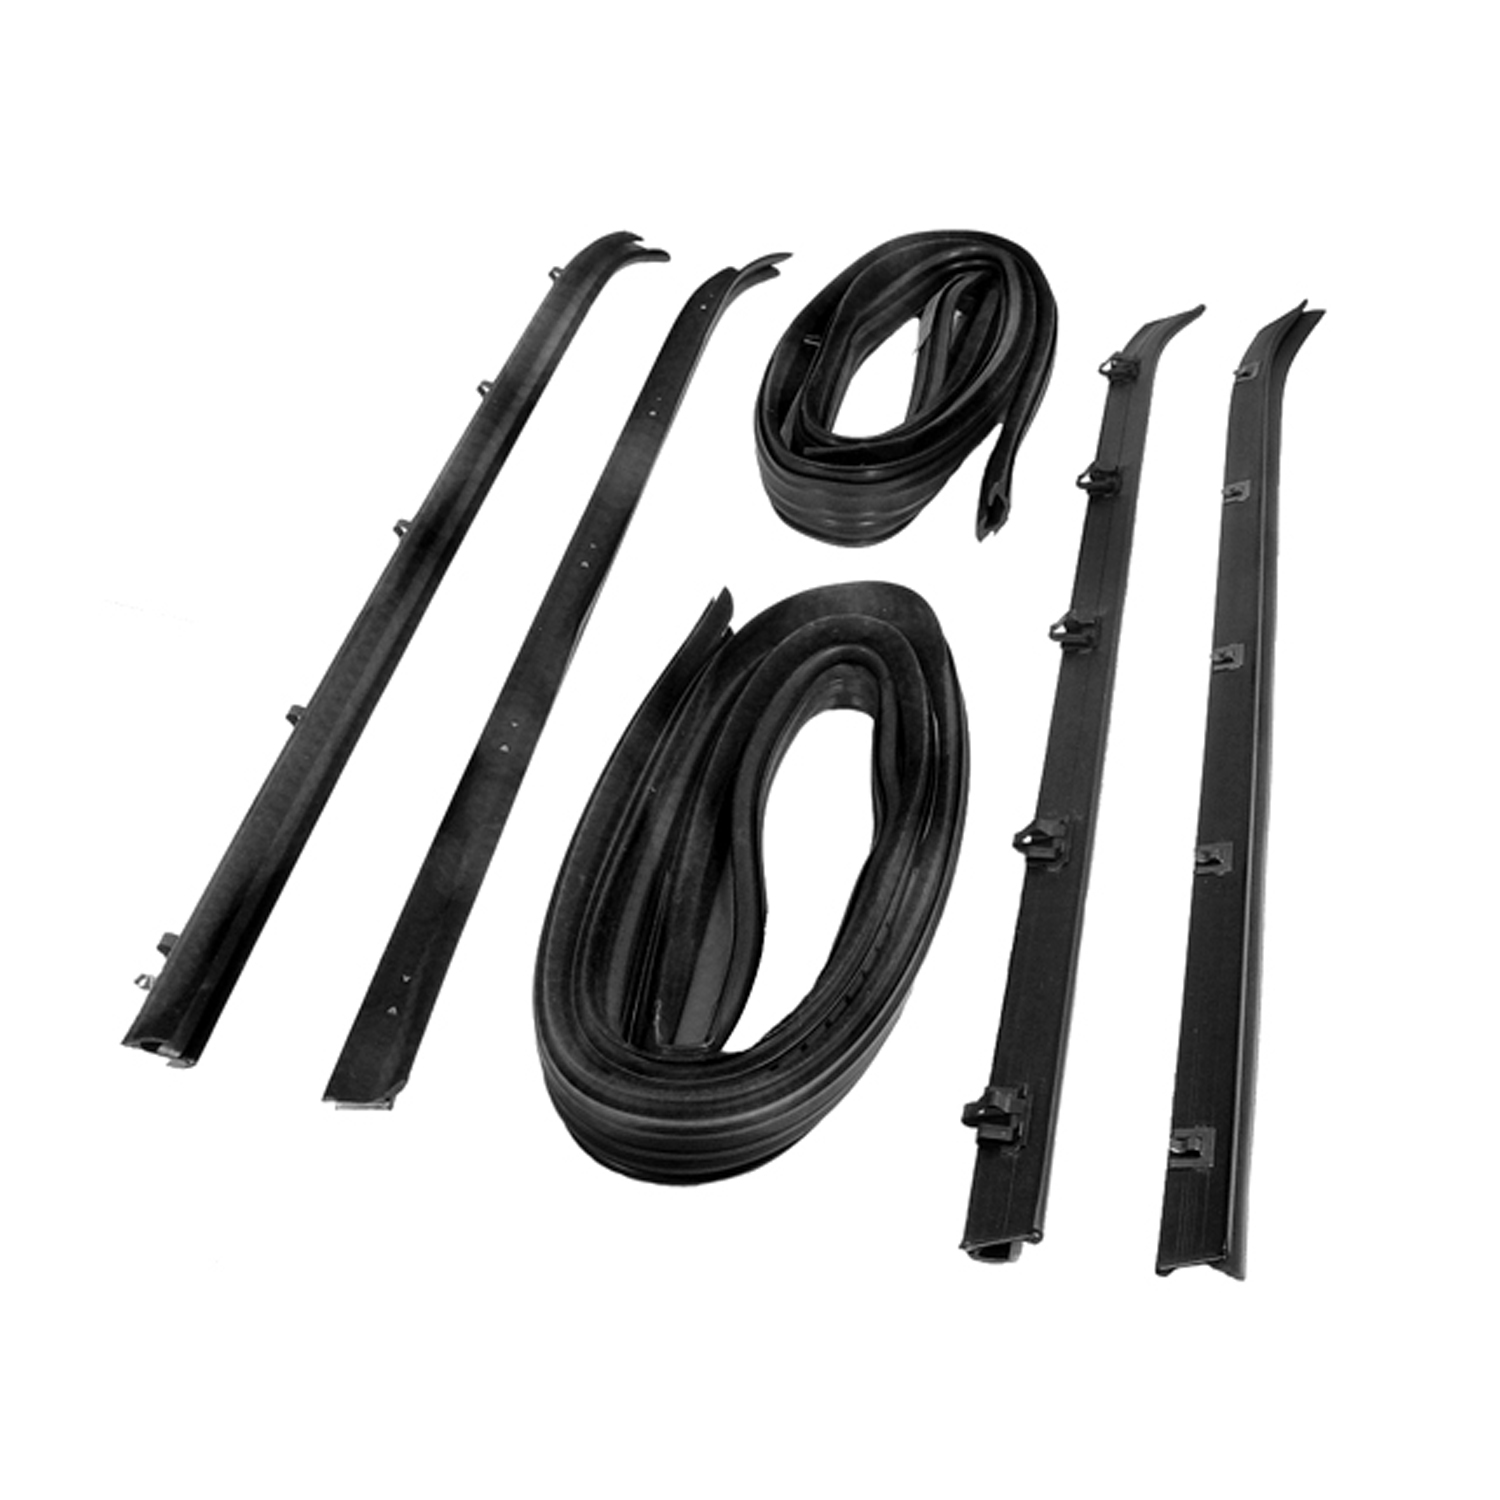 1976 GMC C15 Suburban Window Channel and Sweeper Kit, for Front Doors-WC 5900-15